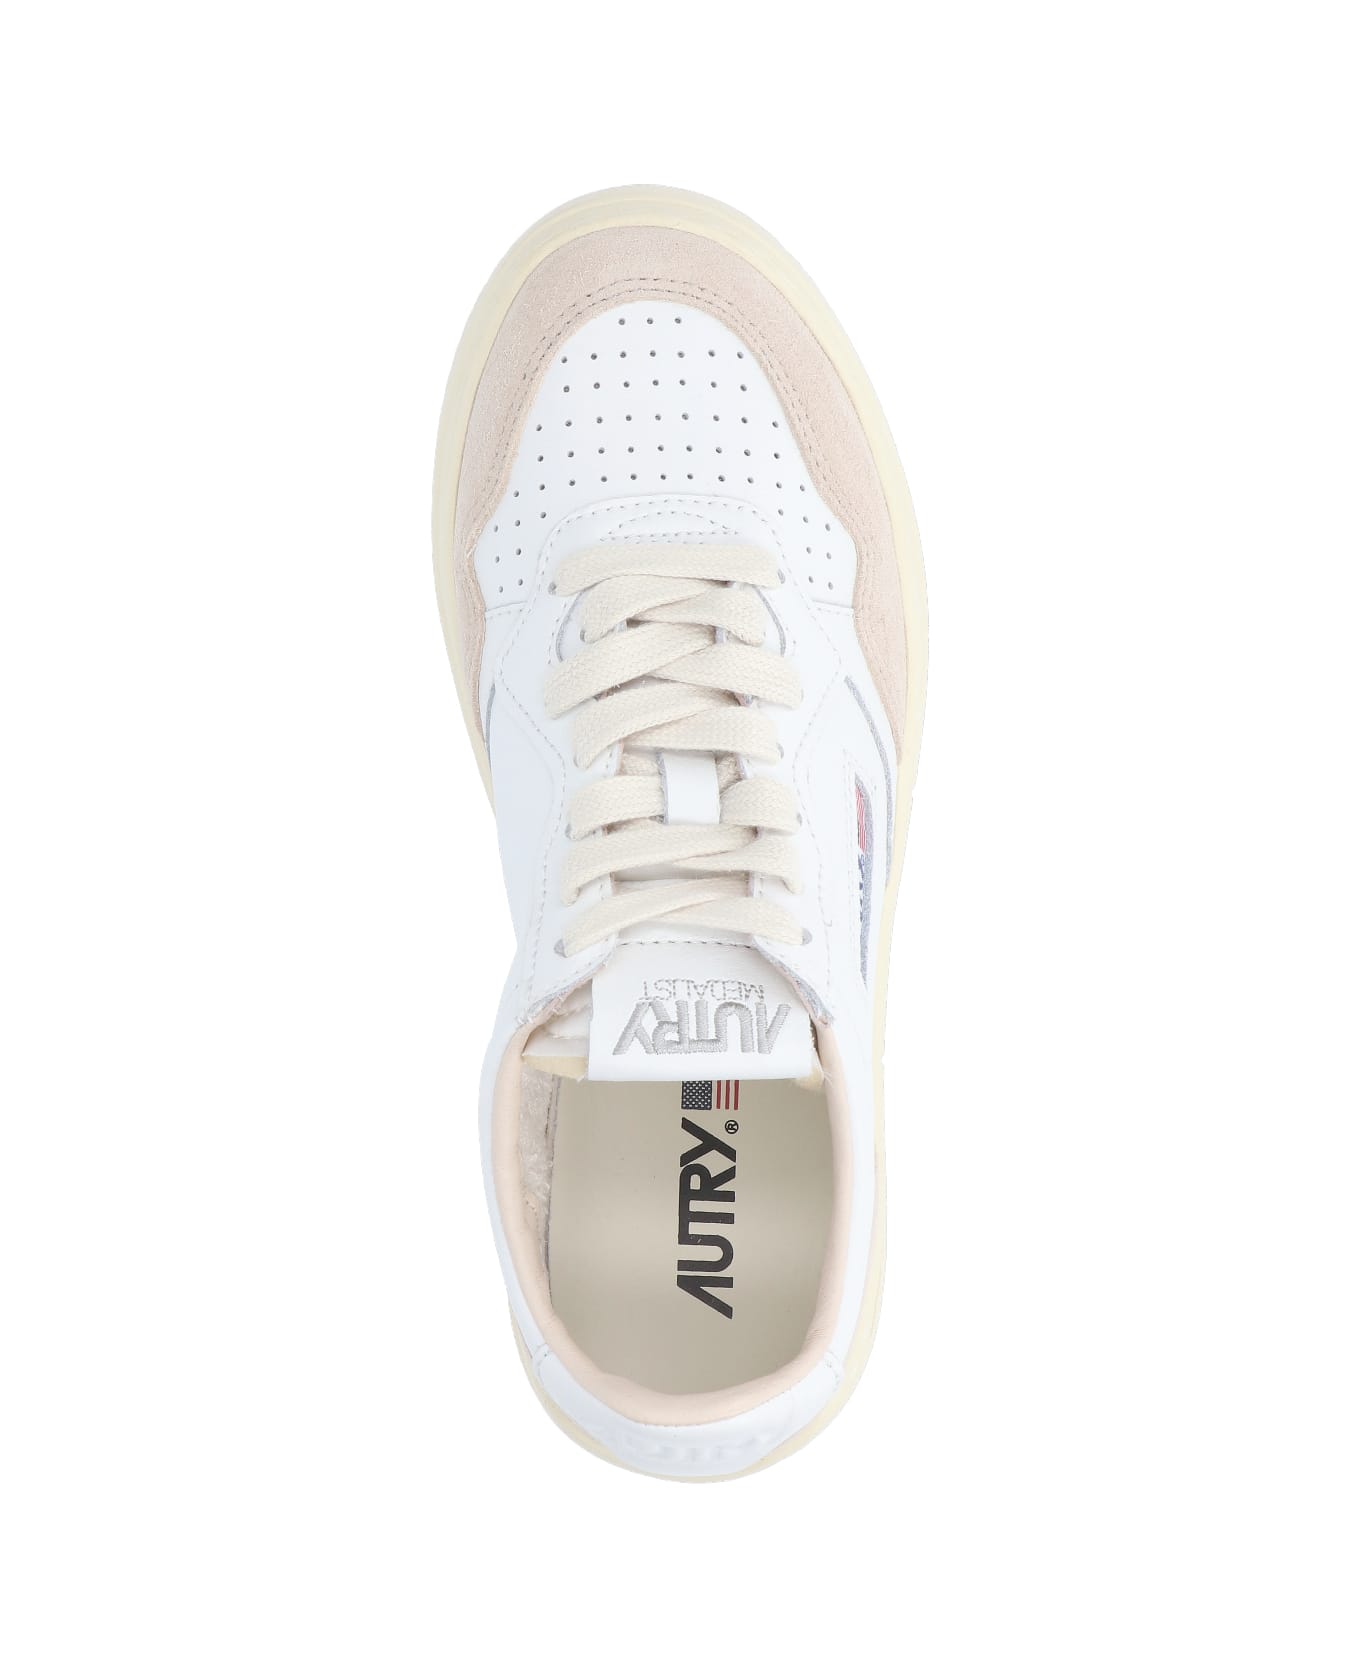 Autry "medalist" Low Sneakers - White スニーカー